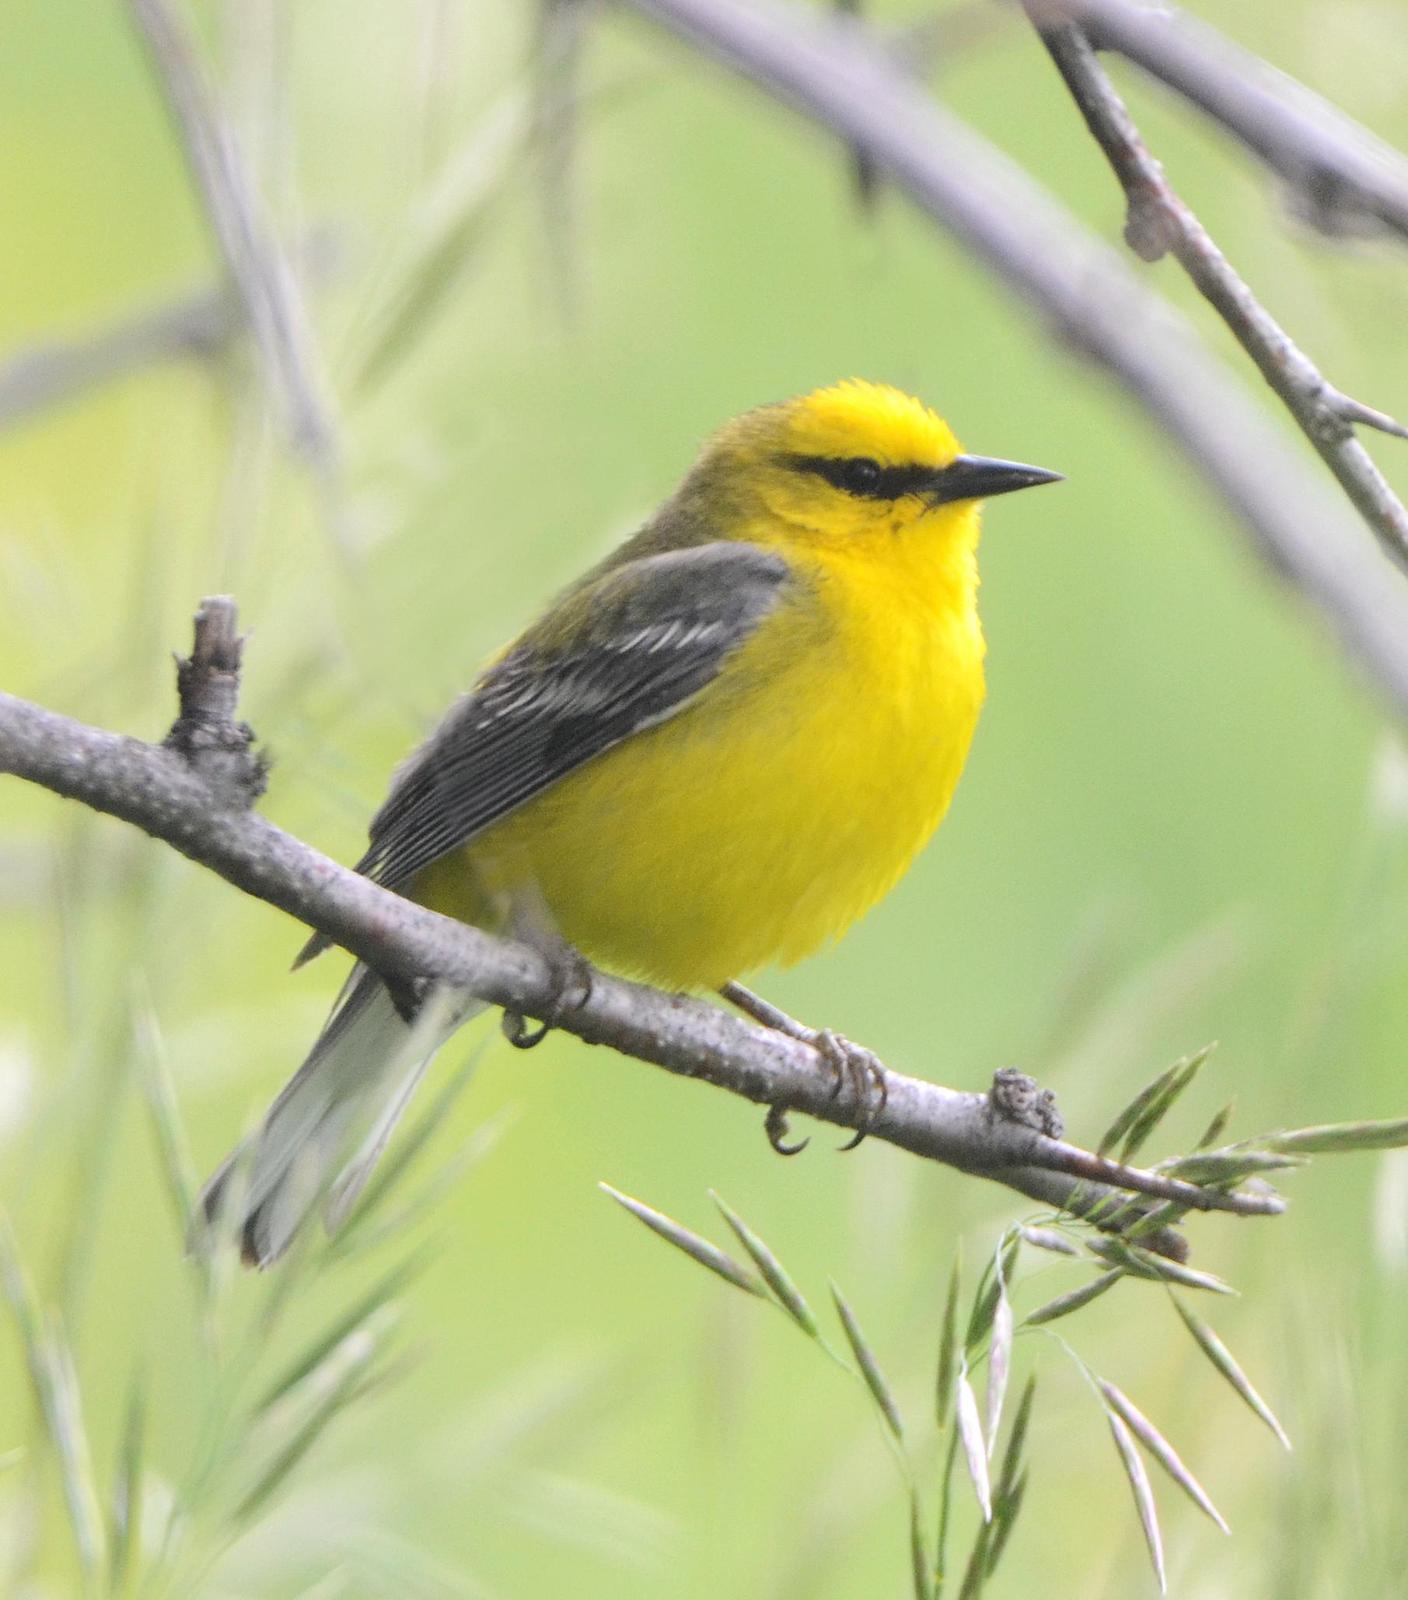 Blue-winged Warbler Photo by Steven Mlodinow